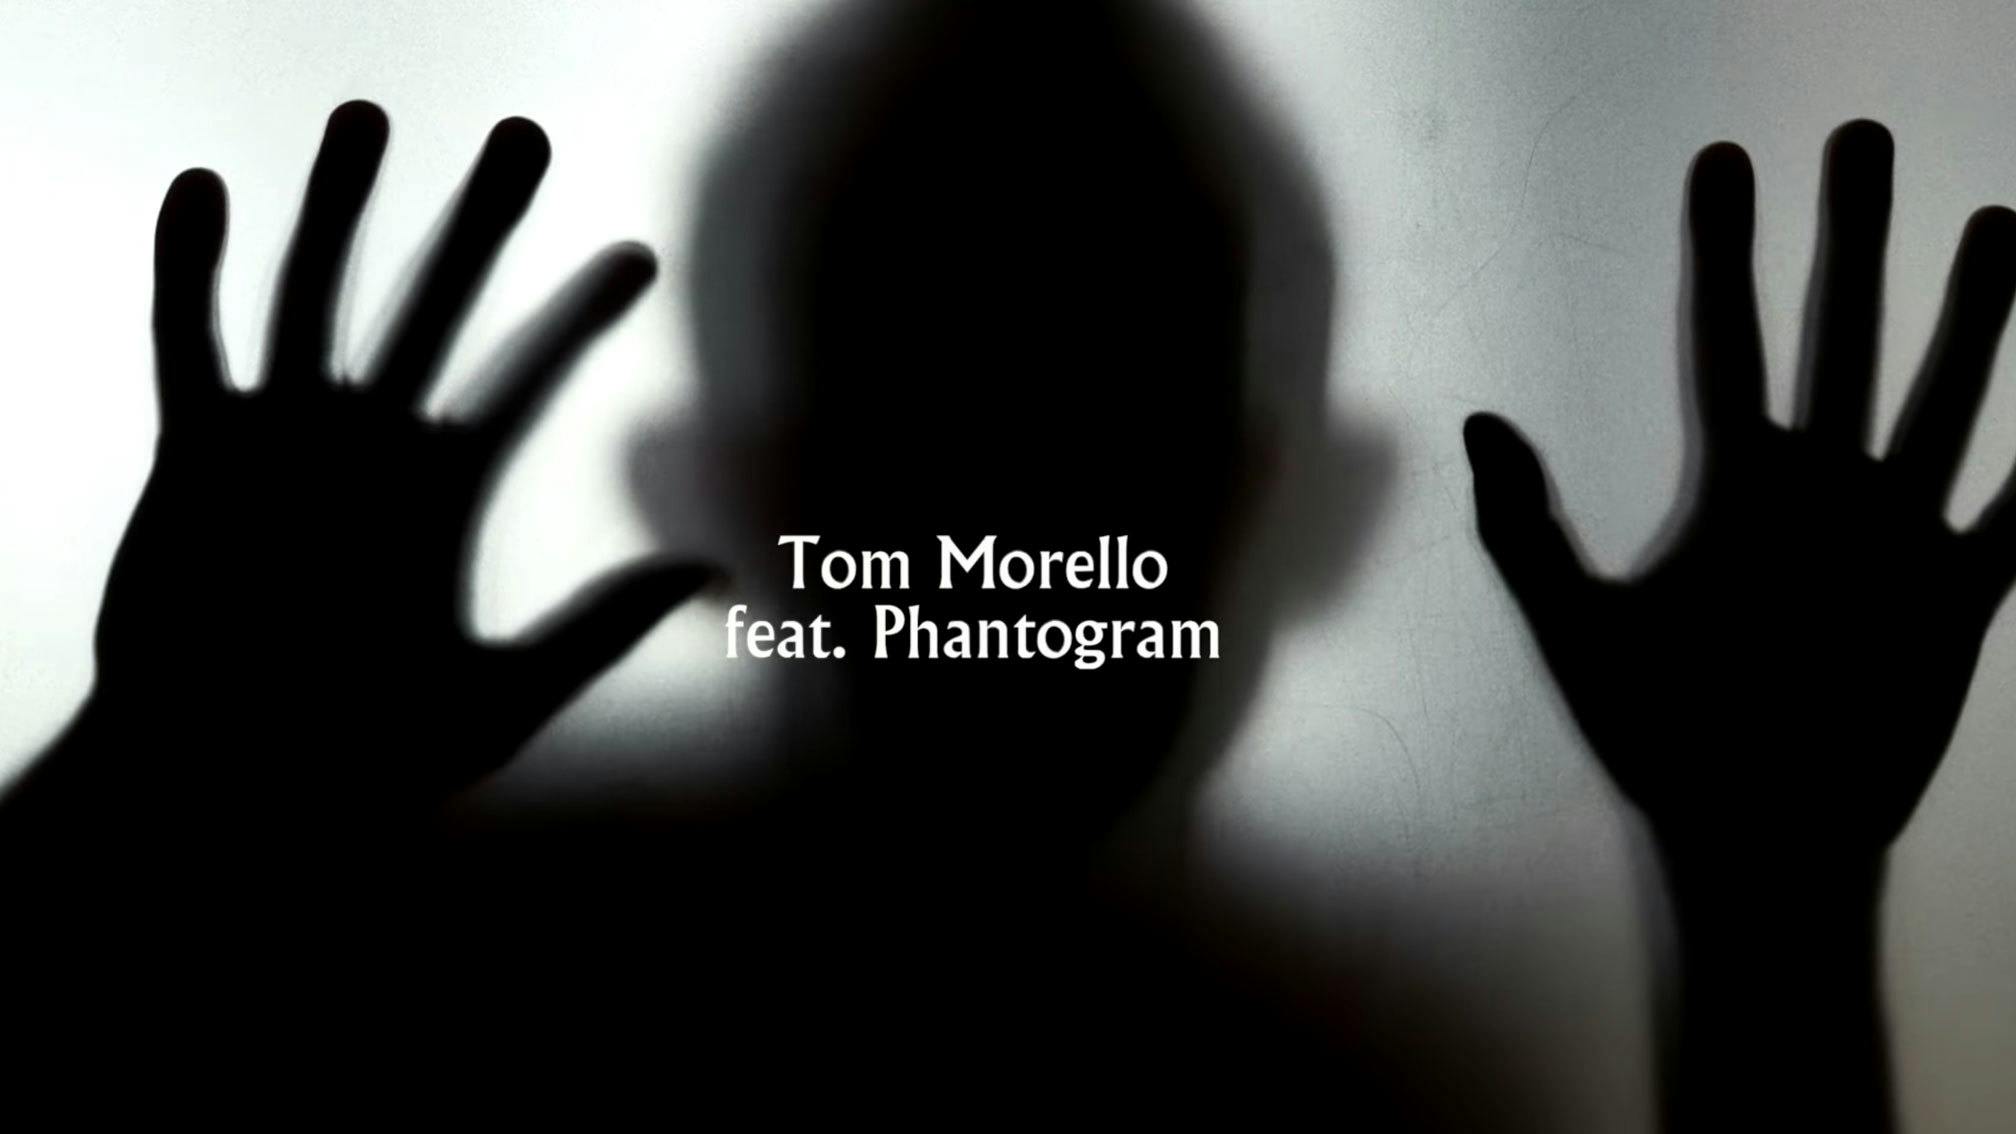 Tom Morello shares "creepy as hell" new song, Driving To Texas